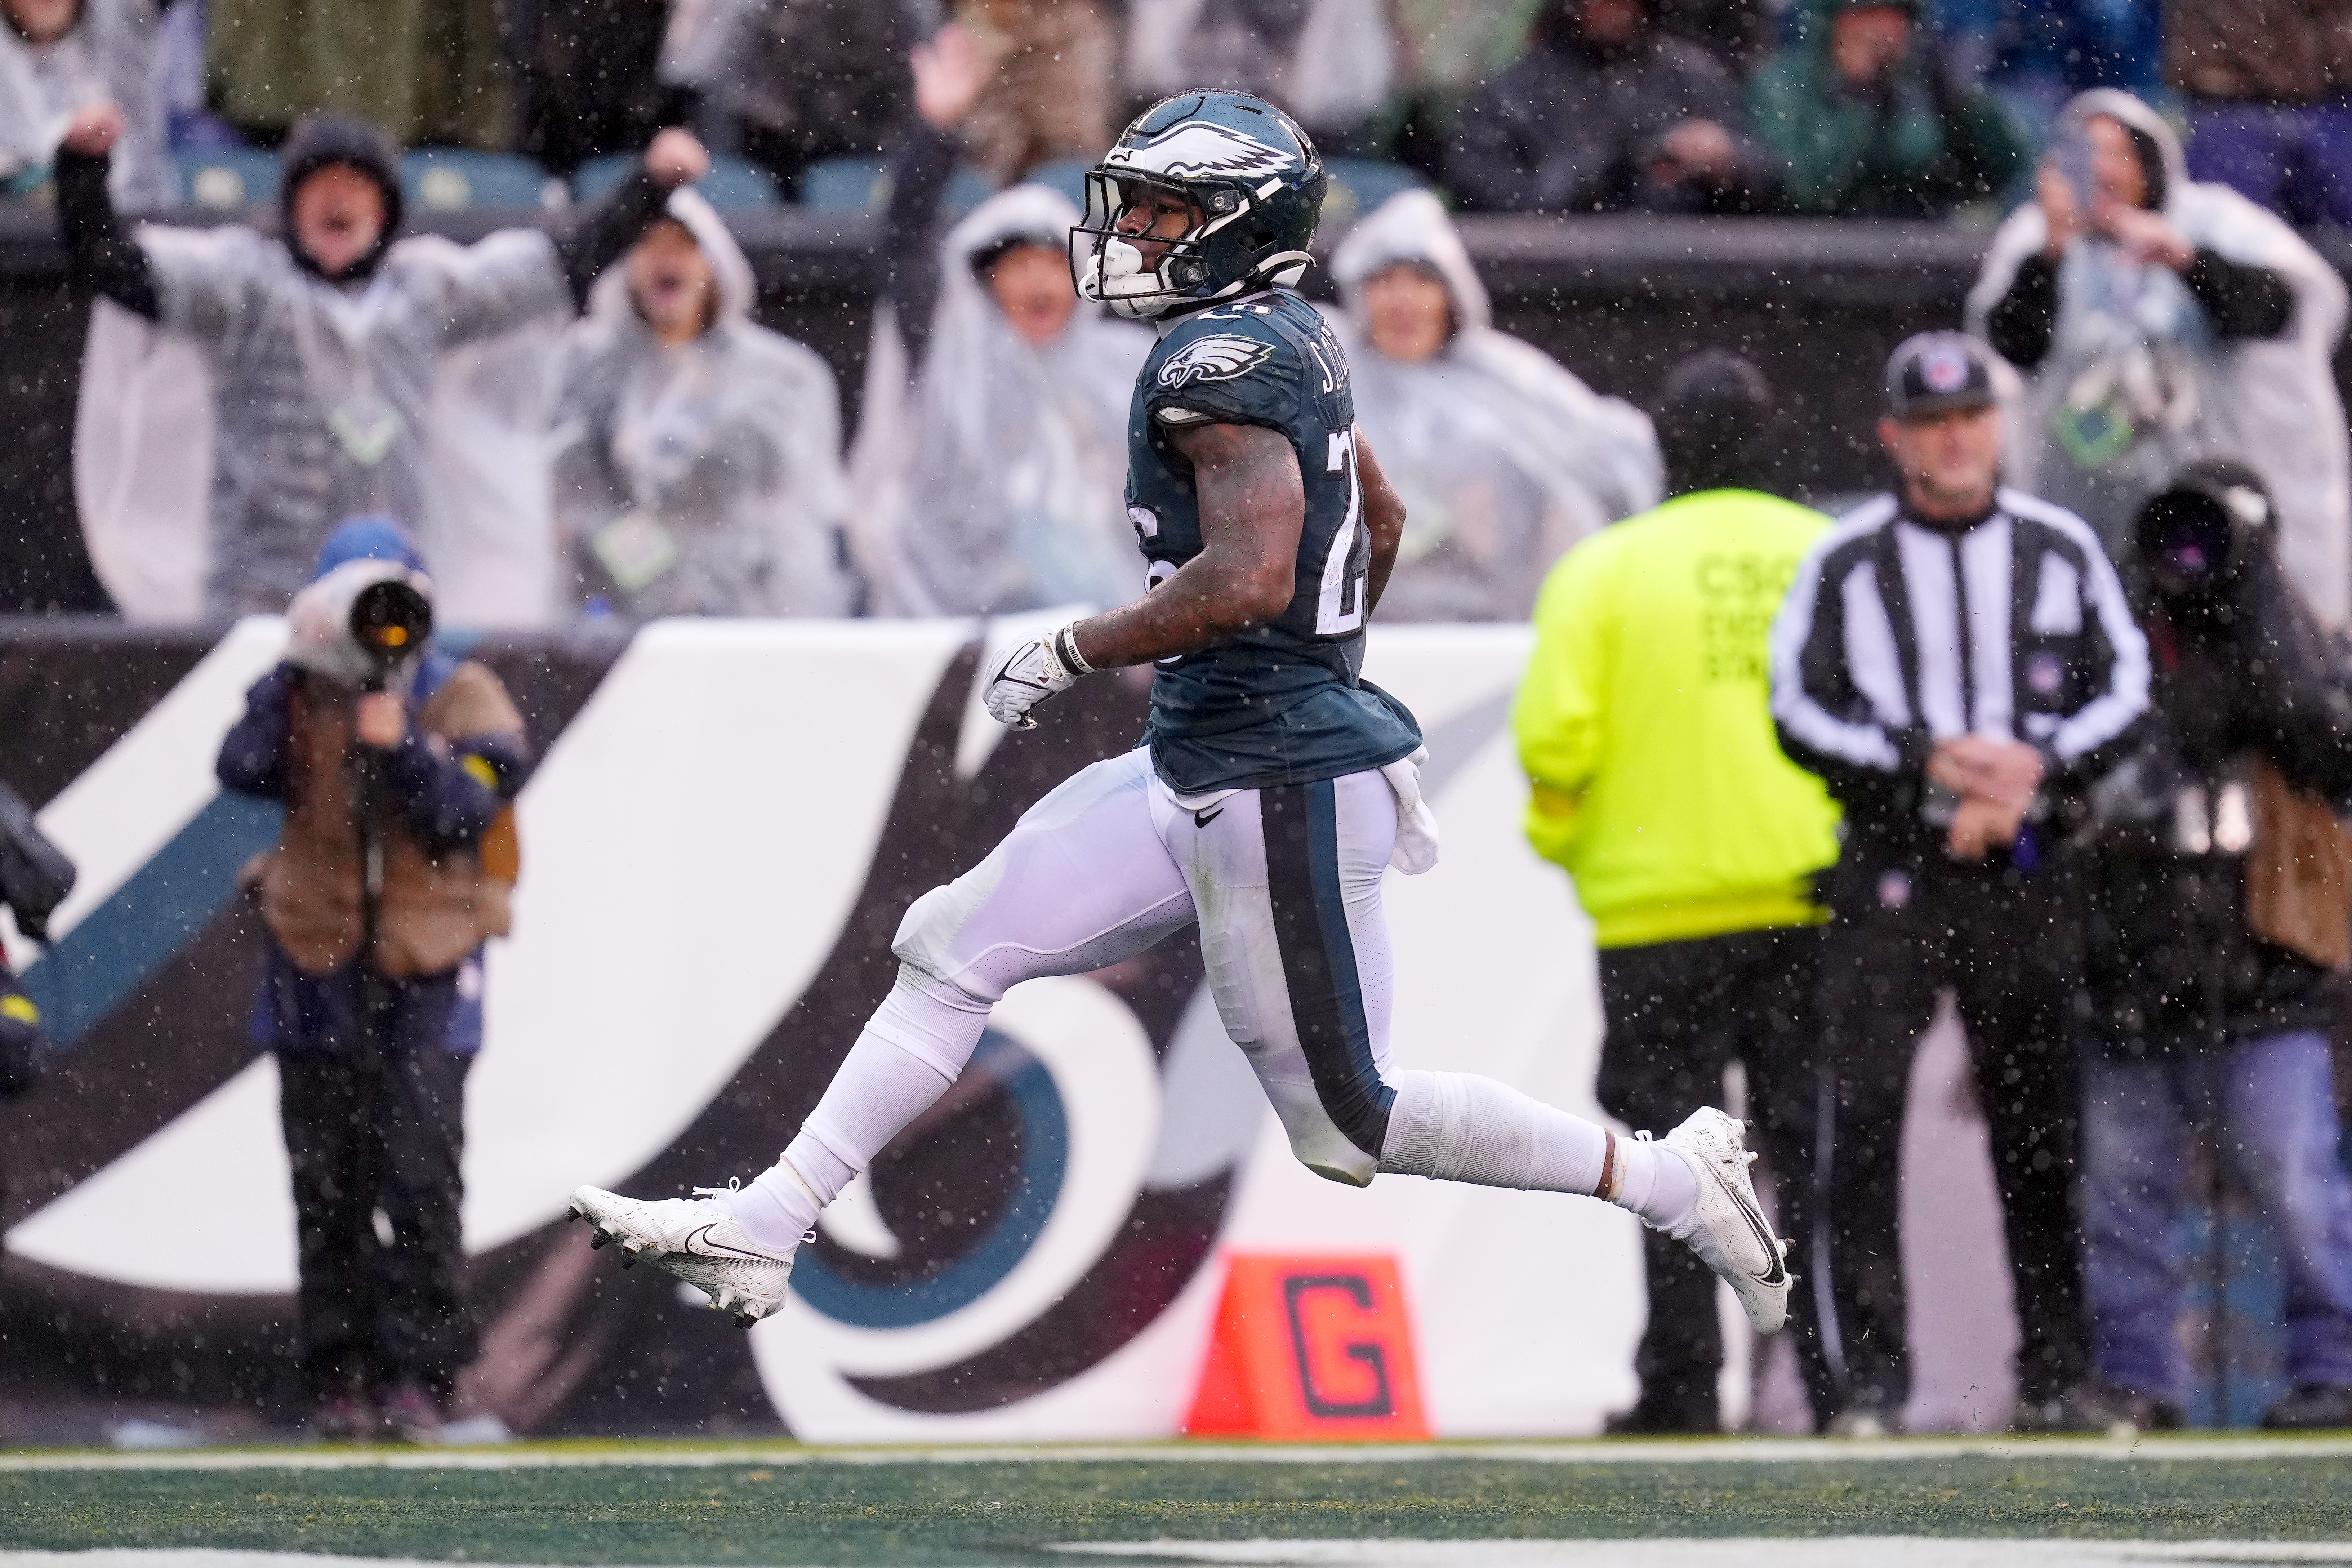 Miles Sanders #26 of the Philadelphia Eagles scores a touchdown during the second quarter against the Jacksonville Jaguars at Lincoln Financial Field on October 02, 2022 in Philadelphia, Pennsylvania.